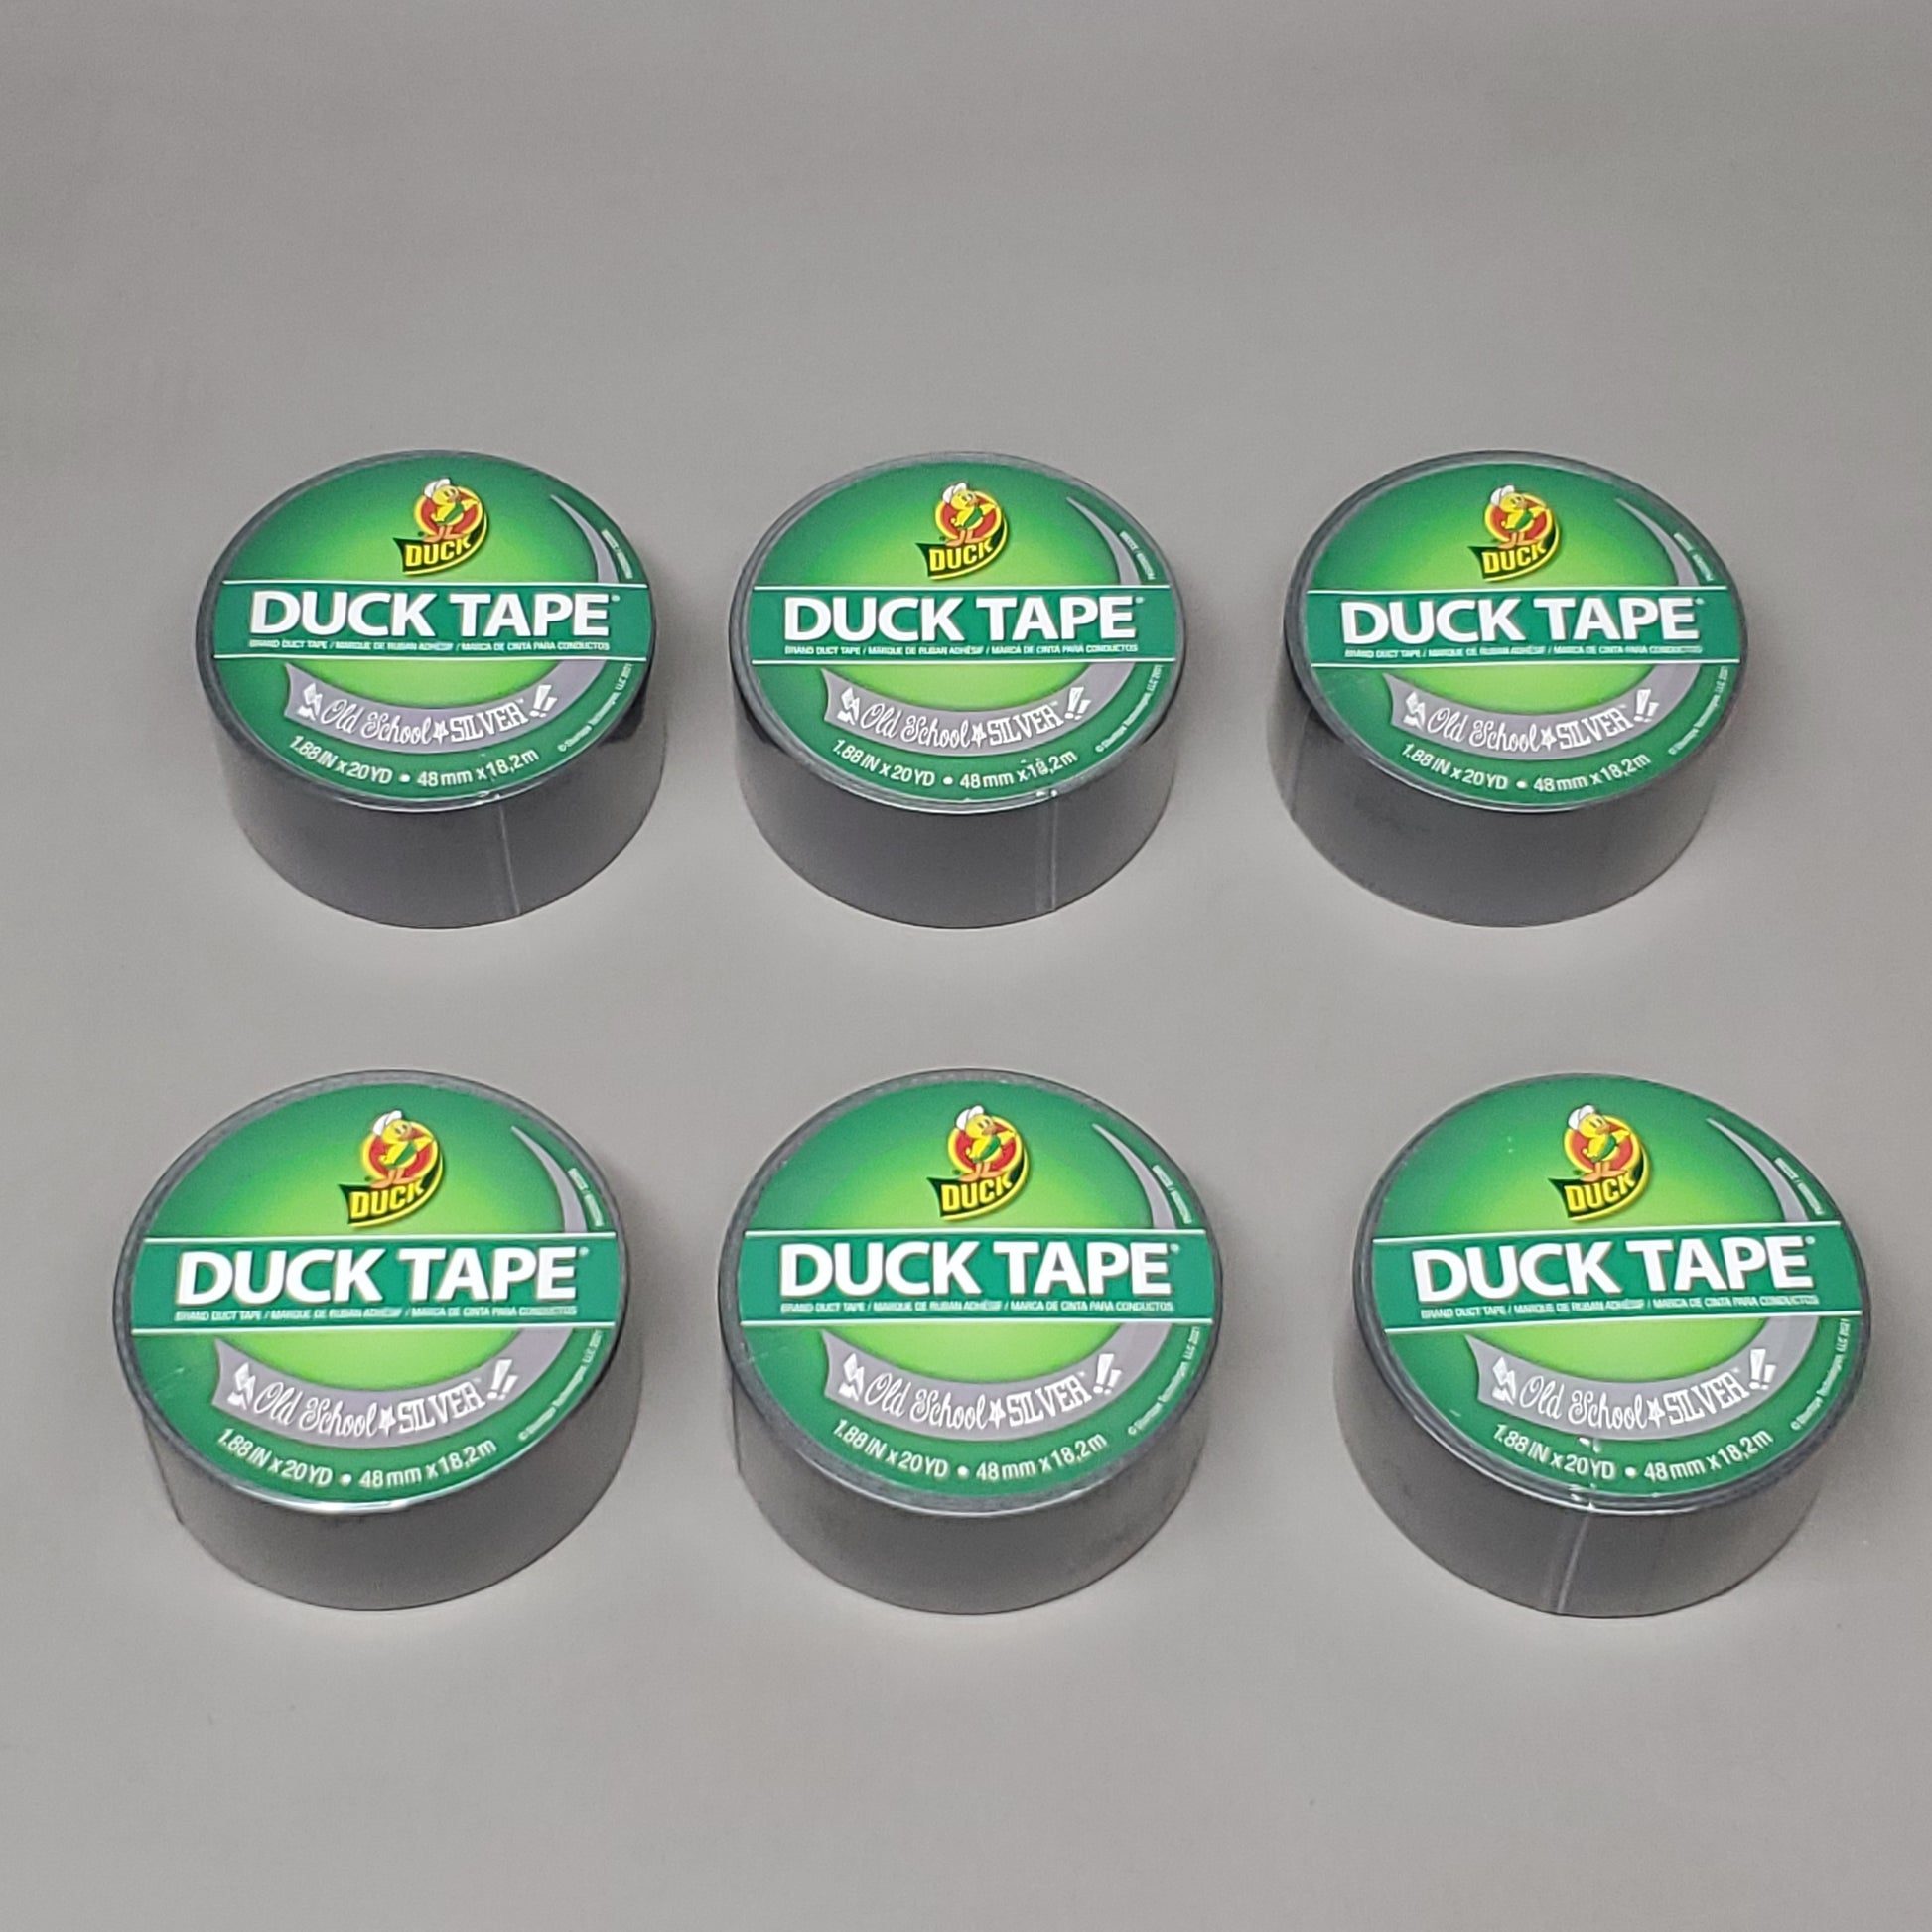 SHURTAPE DUCK TAPE 6 Rolls of Bown Duct Tape 1.88 X 20 YD 283873 (New)